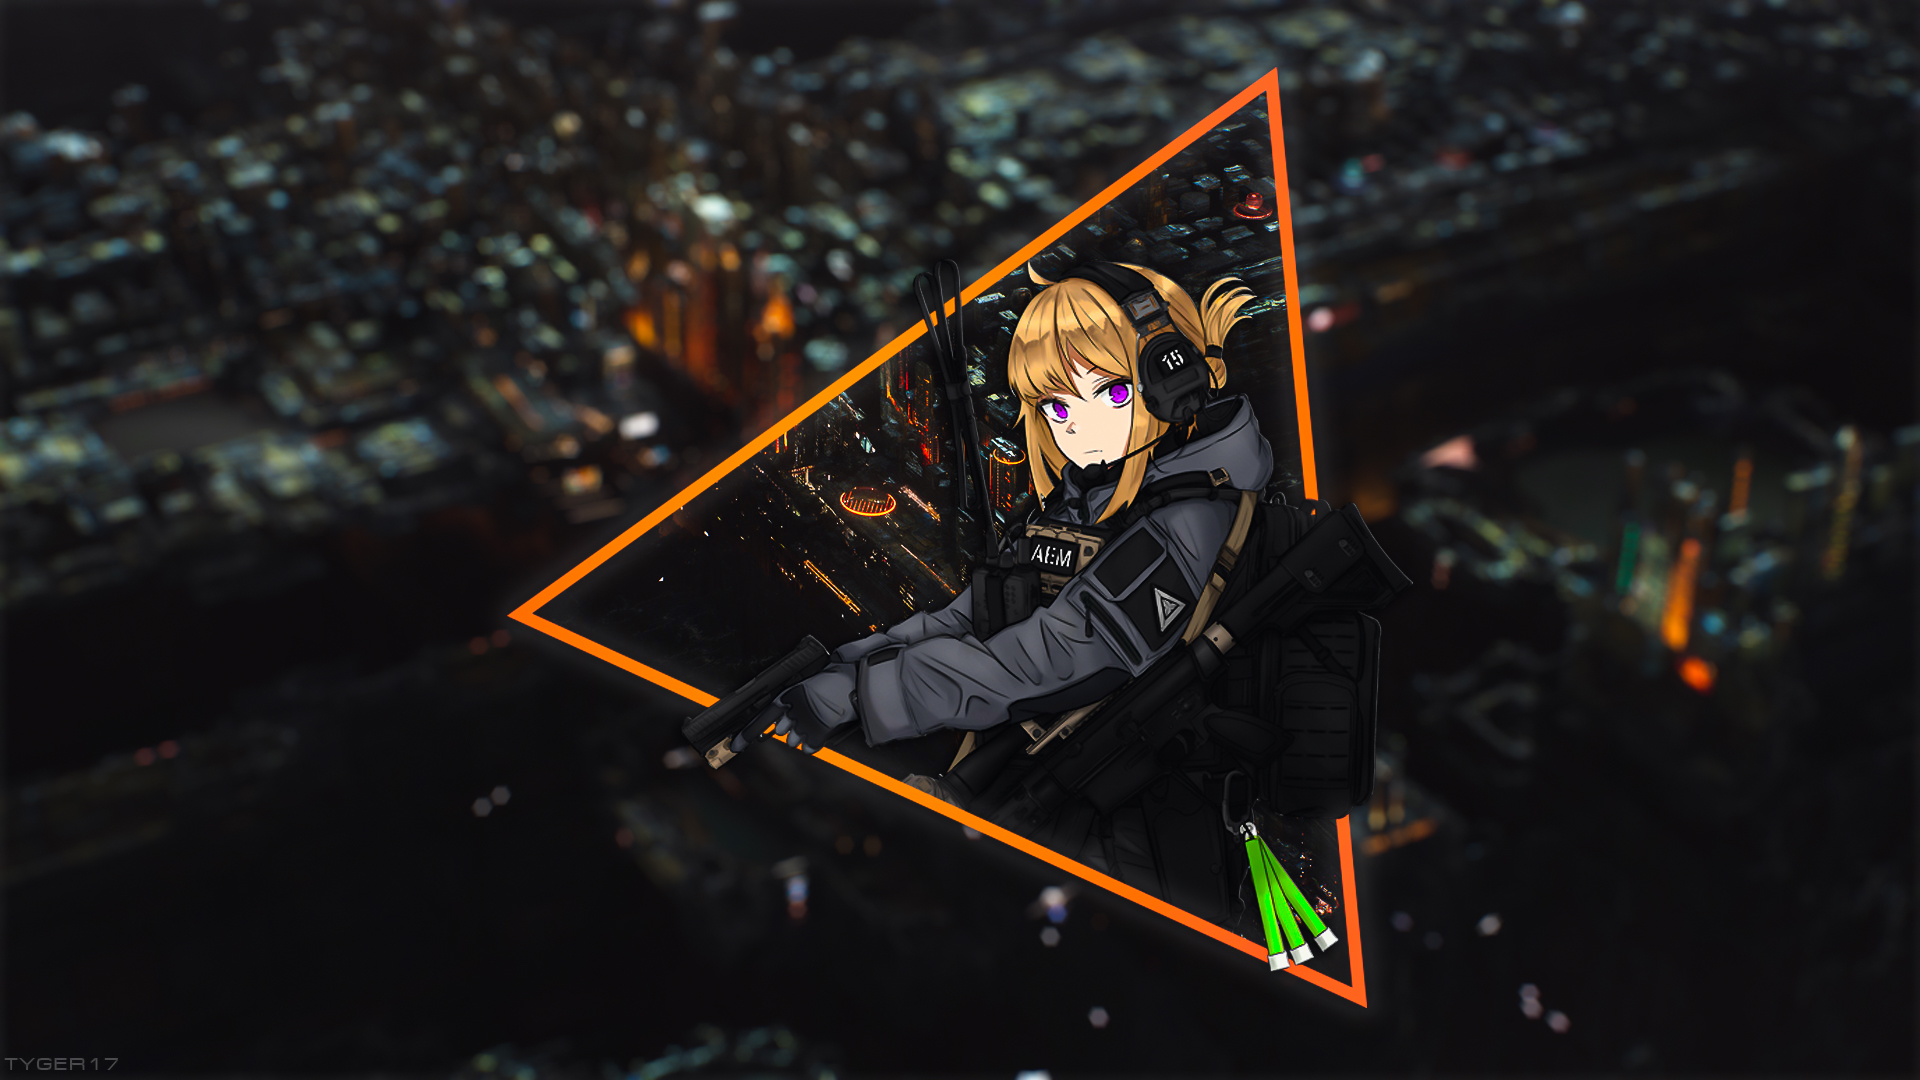 Anime Girls Anime Guns Blonde Picture In Picture Cityscape Triangle Tactical 1920x1080